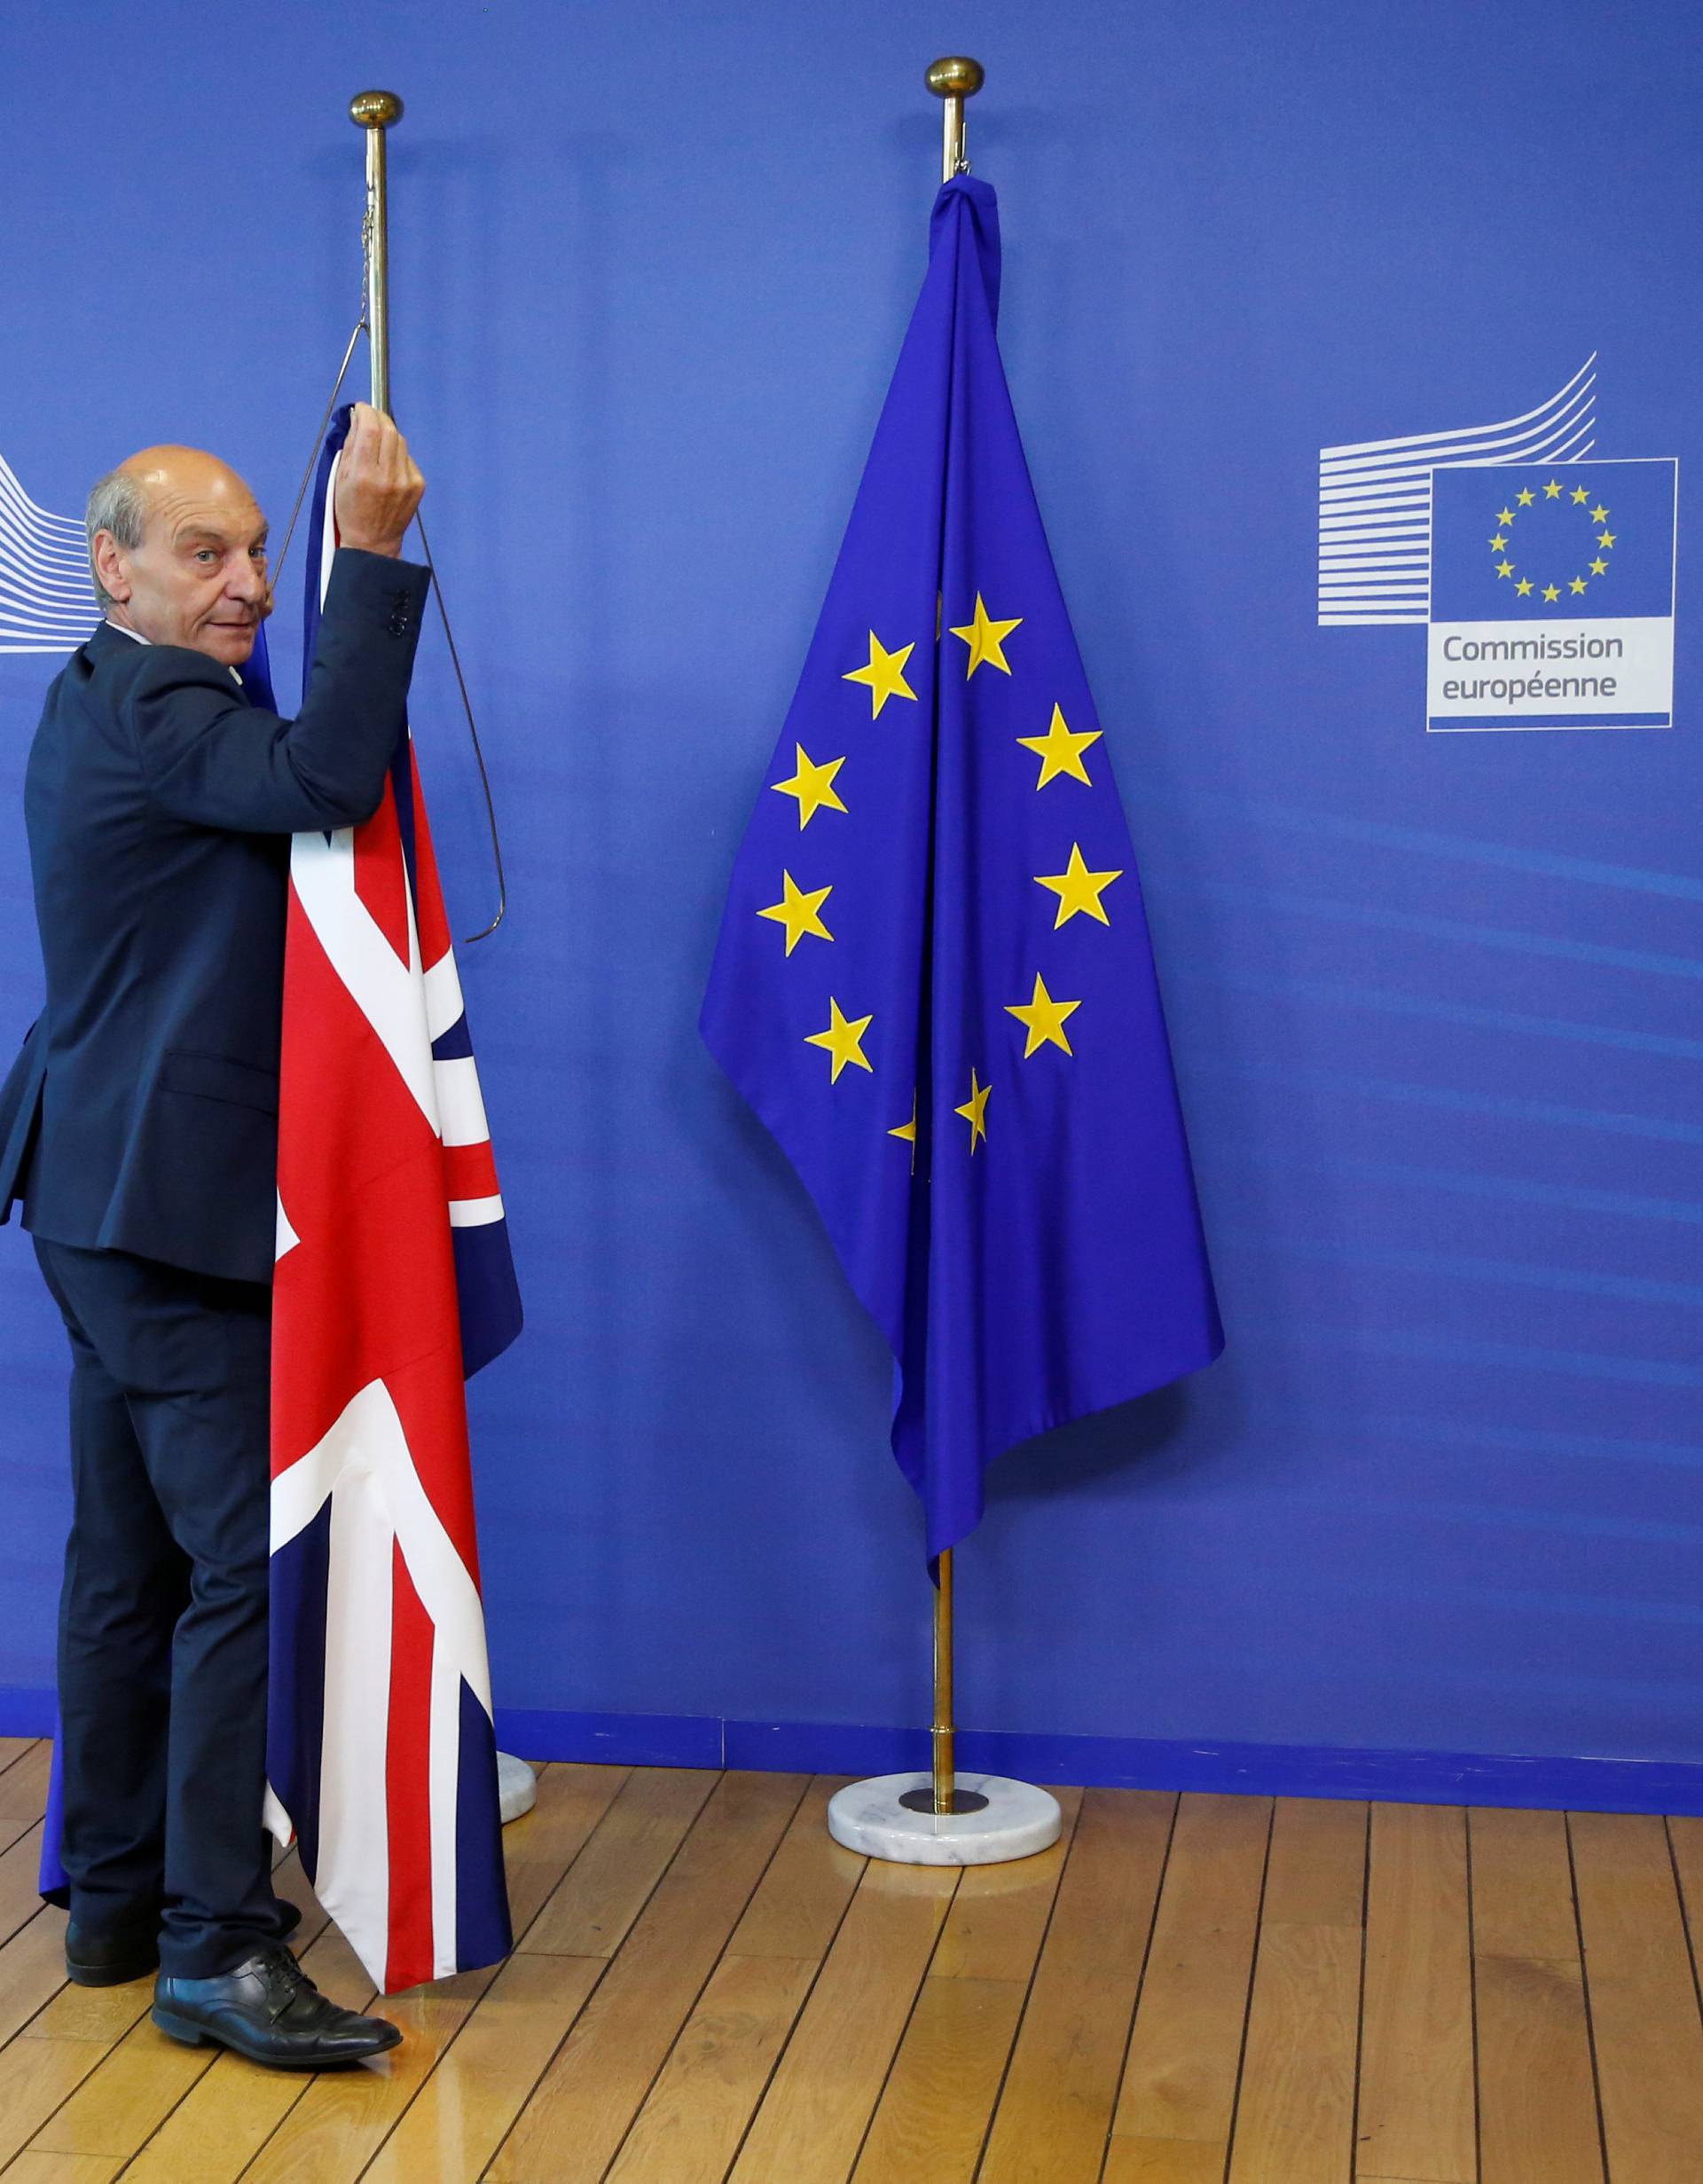 Flags are arranged at the EU headquarters as Britain and EU launch Brexit talks in Brussels